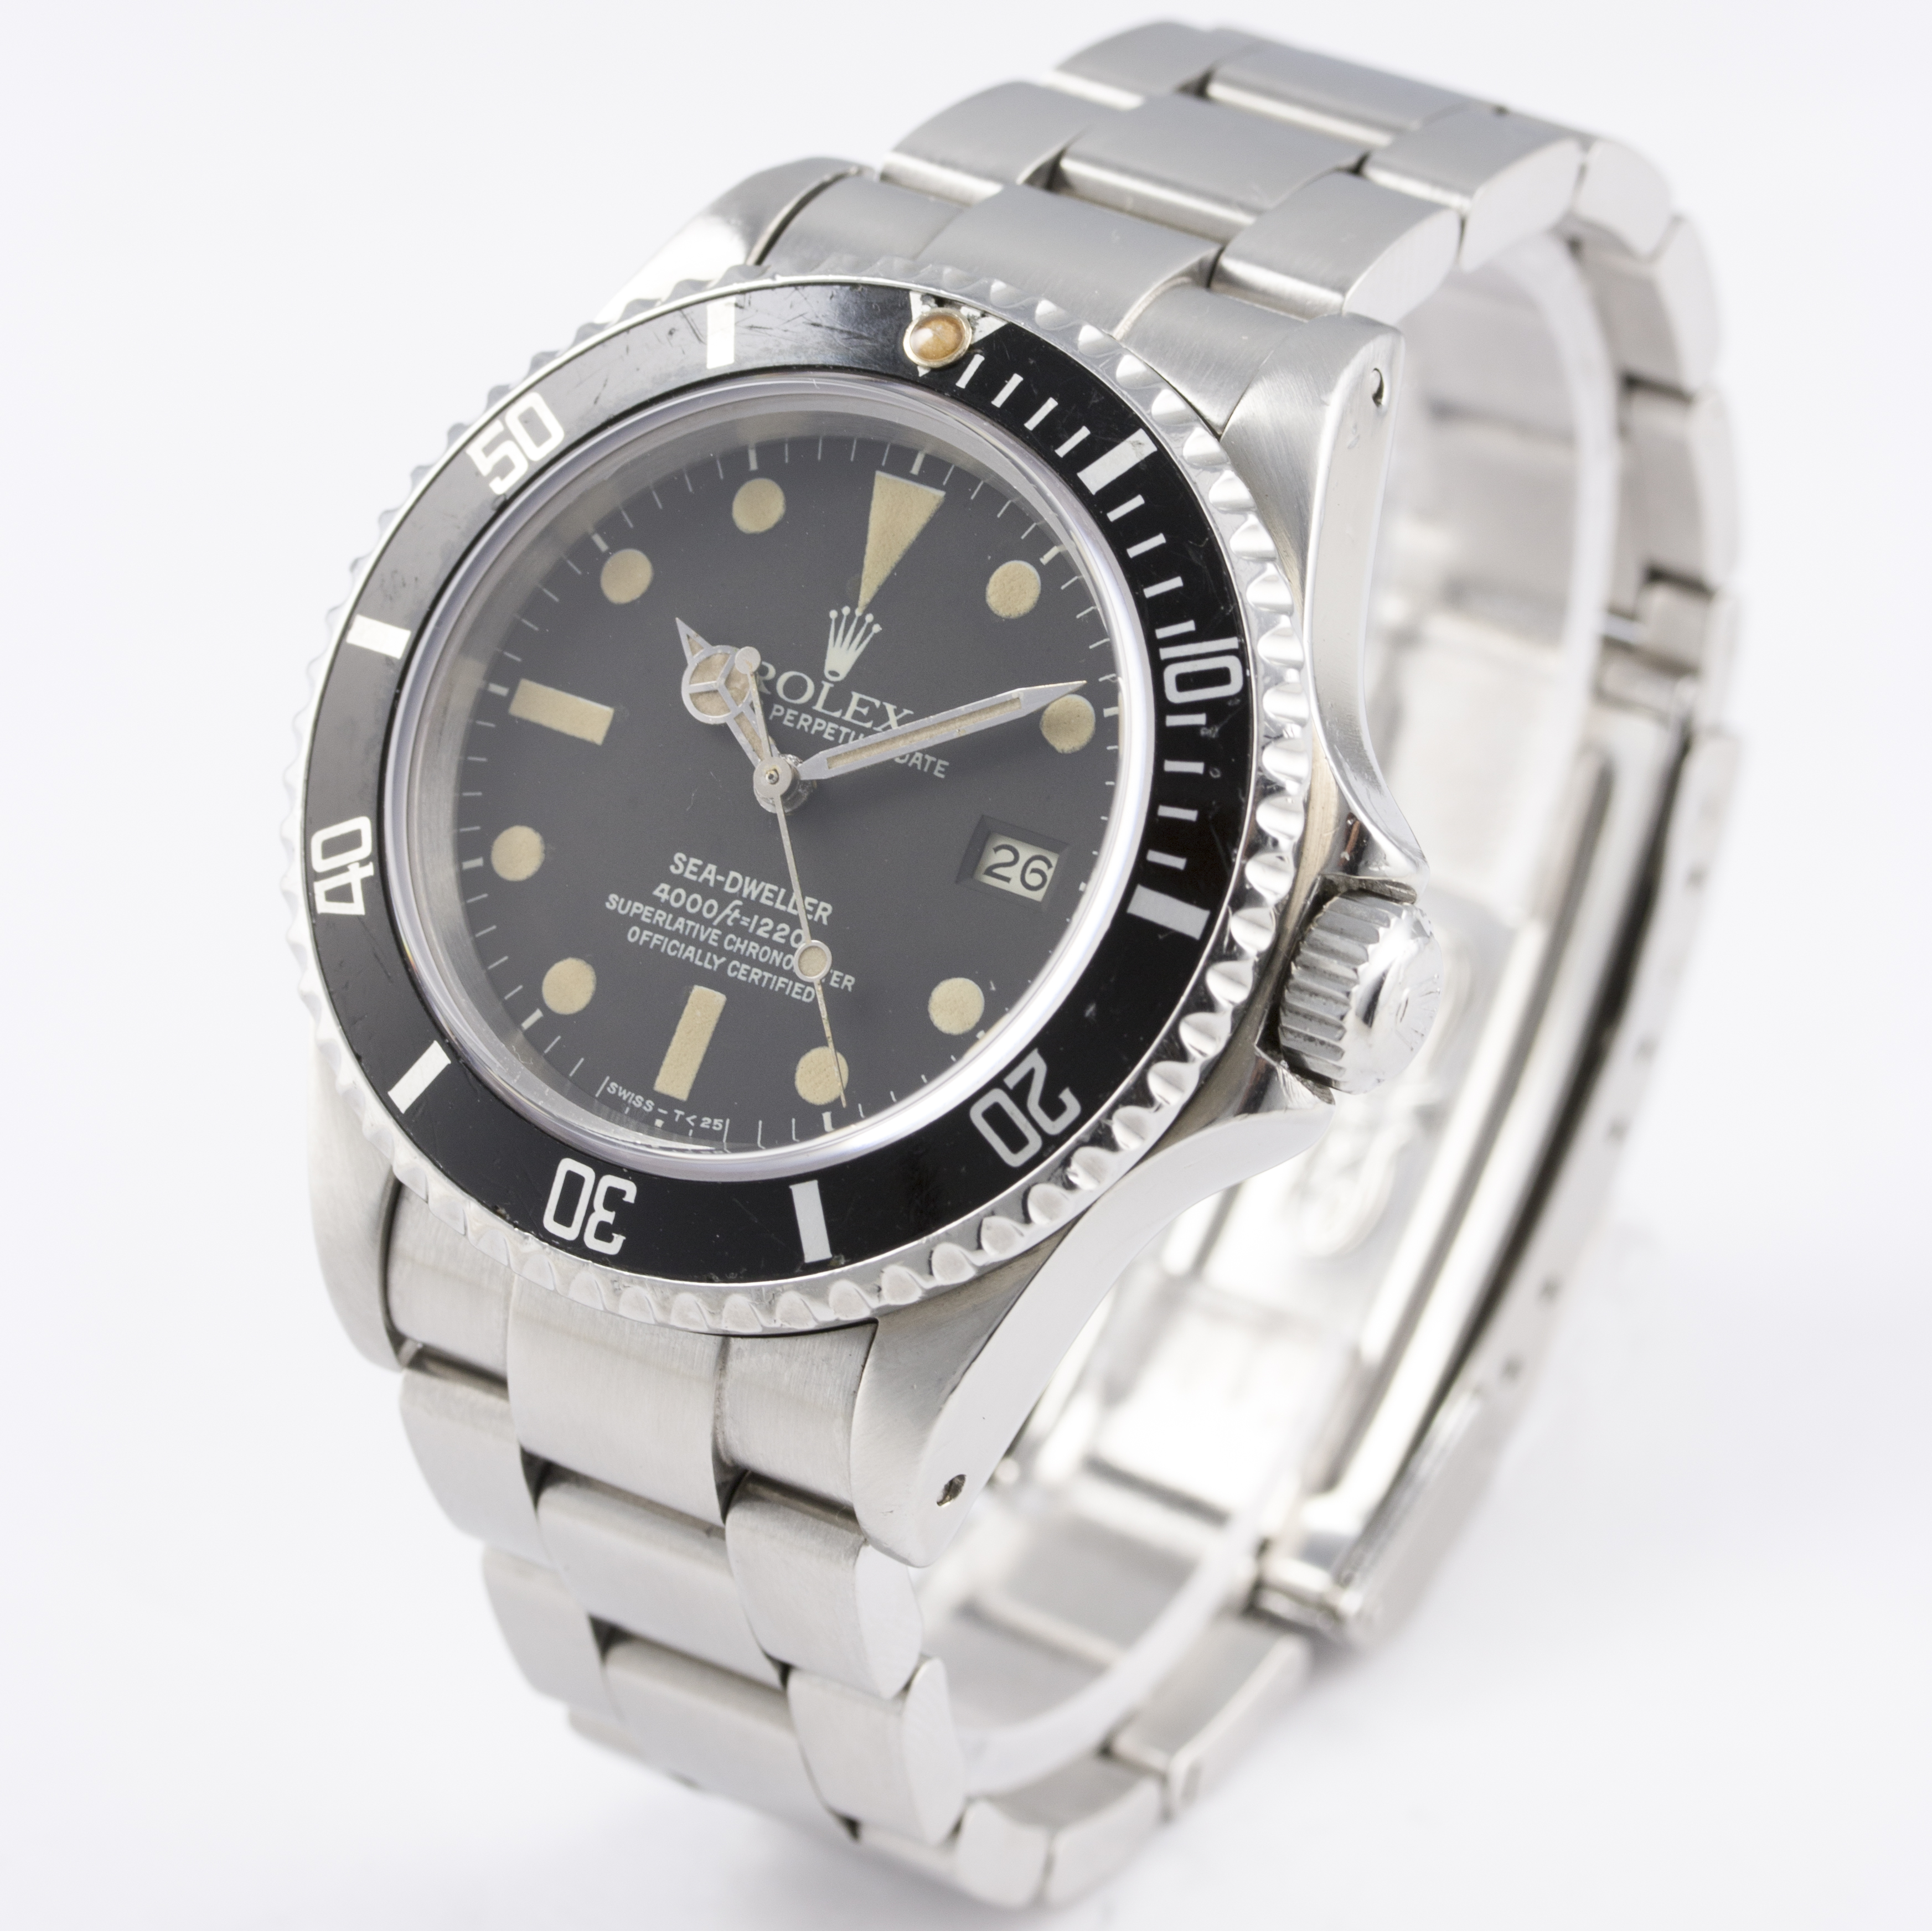 A RARE GENTLEMAN'S STAINLESS STEEL ROLEX OYSTER PERPETUAL DATE SEA DWELLER BRACELET WATCH CIRCA - Image 5 of 8